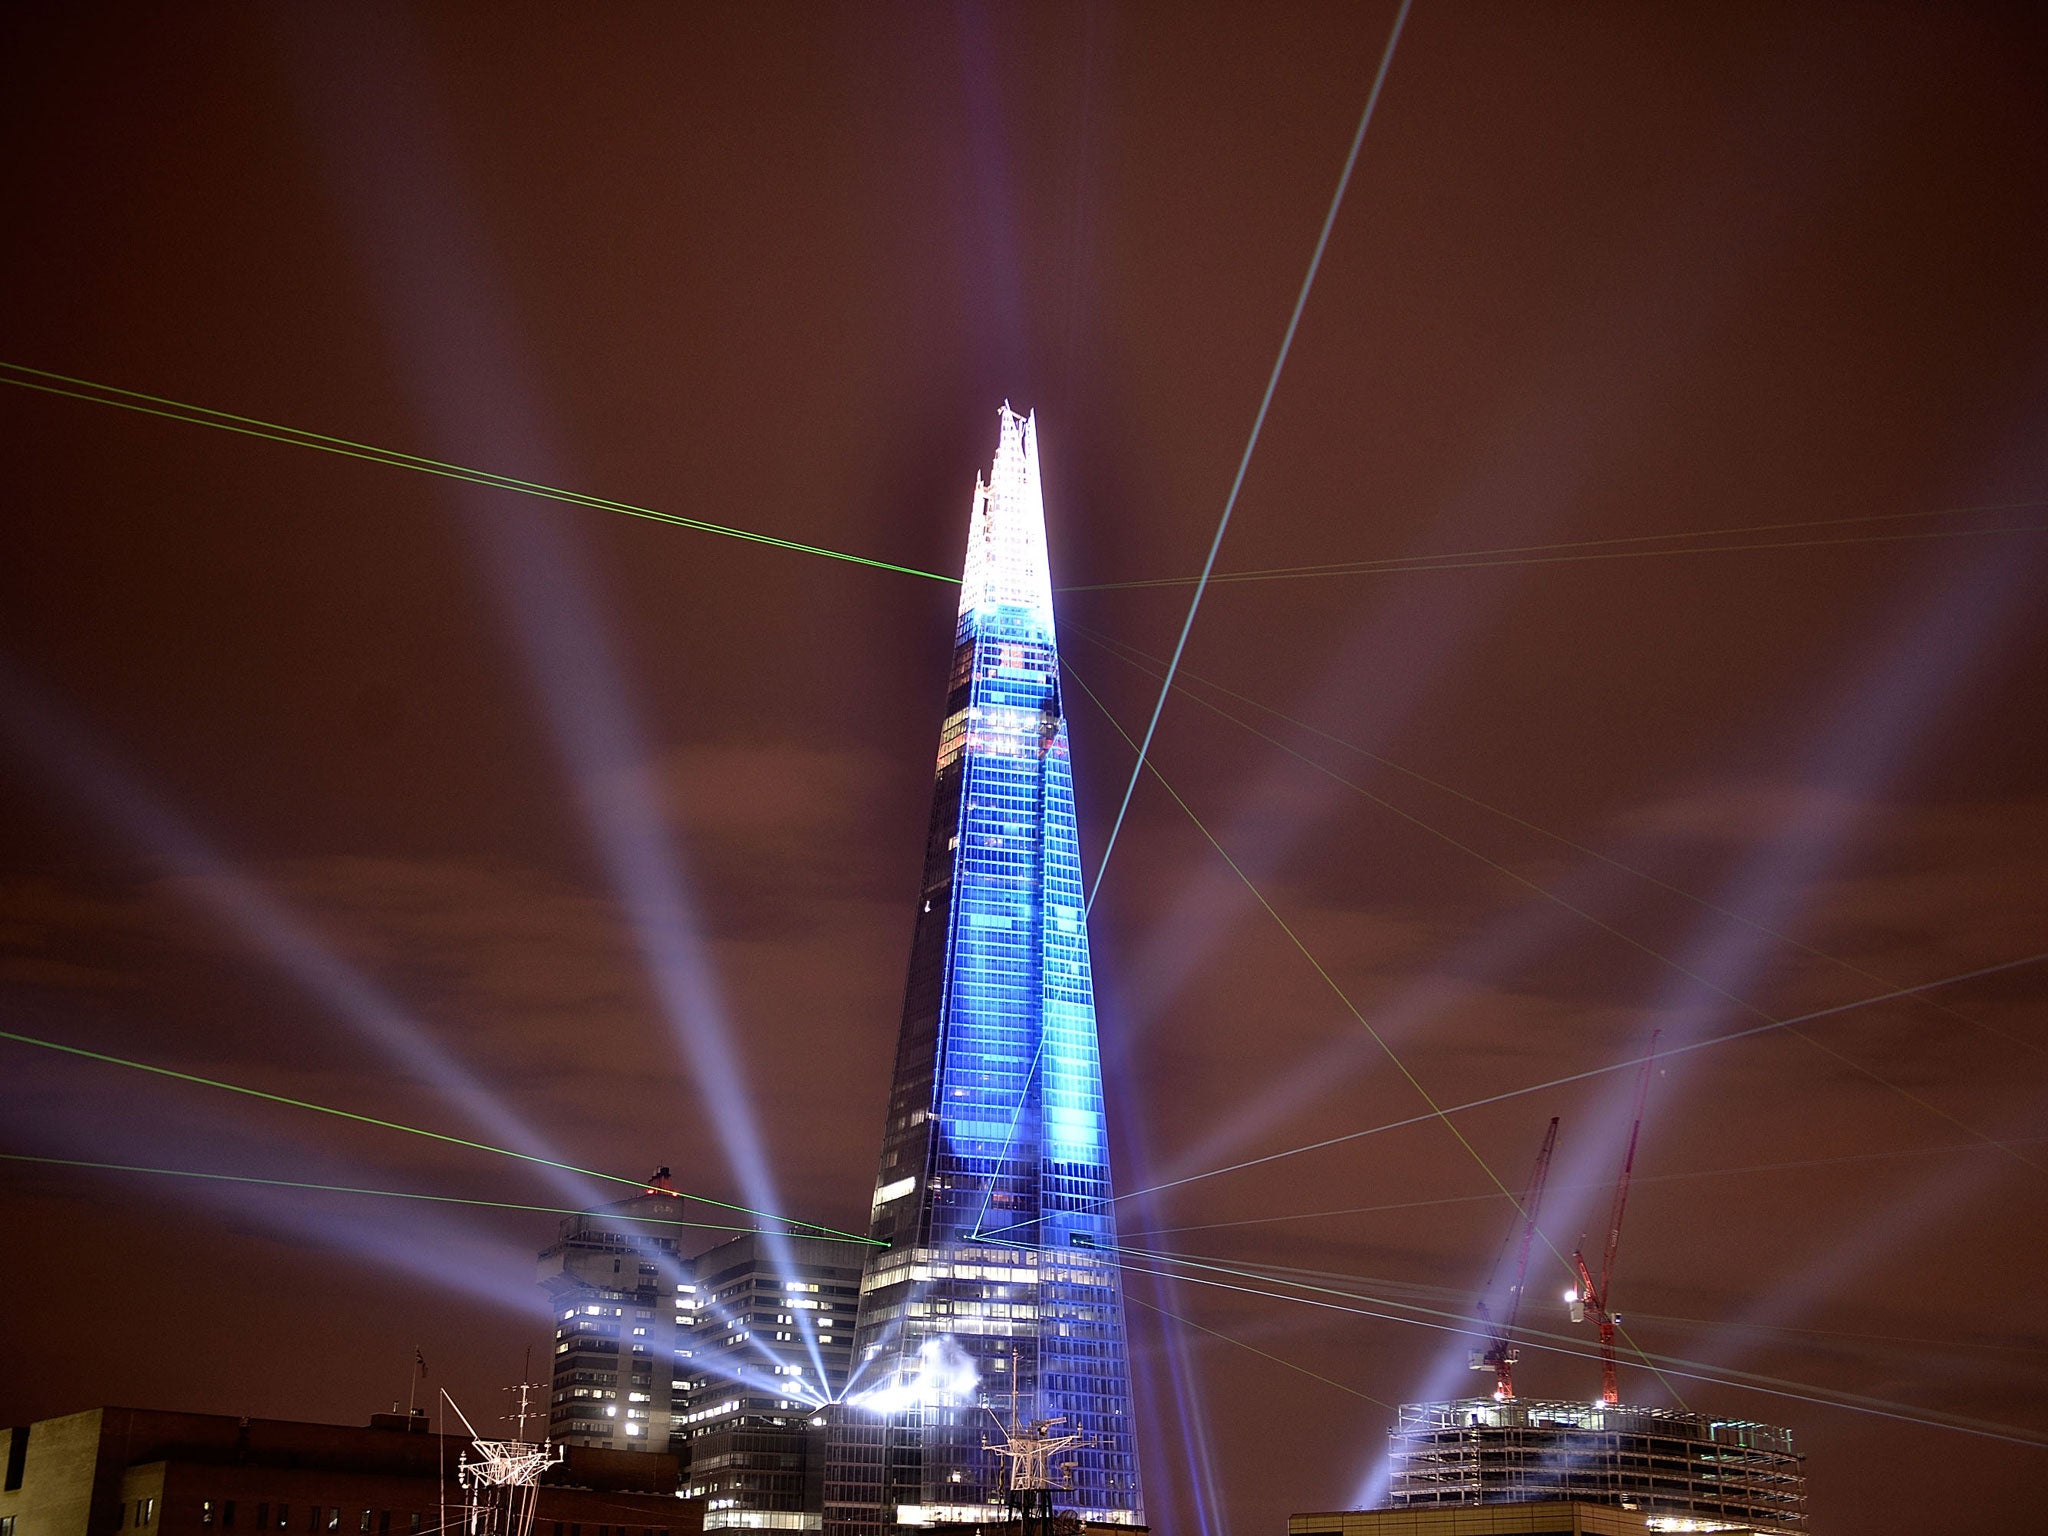 Money from the Middle East has already financed developments such as the Shard in London Bridge